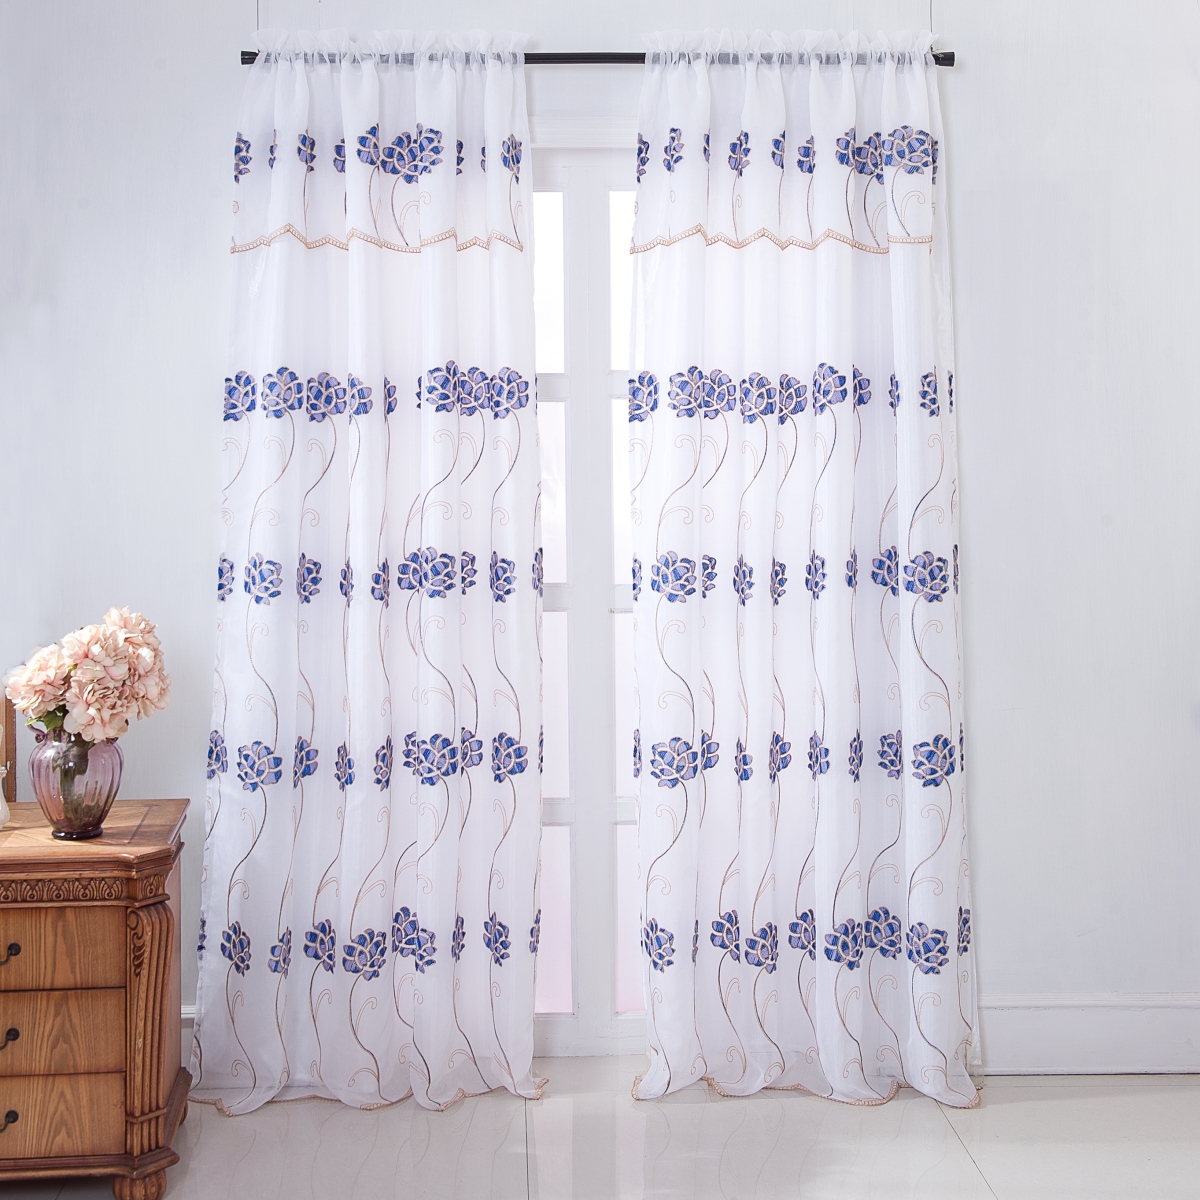 Pns19108 Sapphire Floral Embroidered Rod Pocket Single Curtain Panel In Blue - 54 X 84 In.